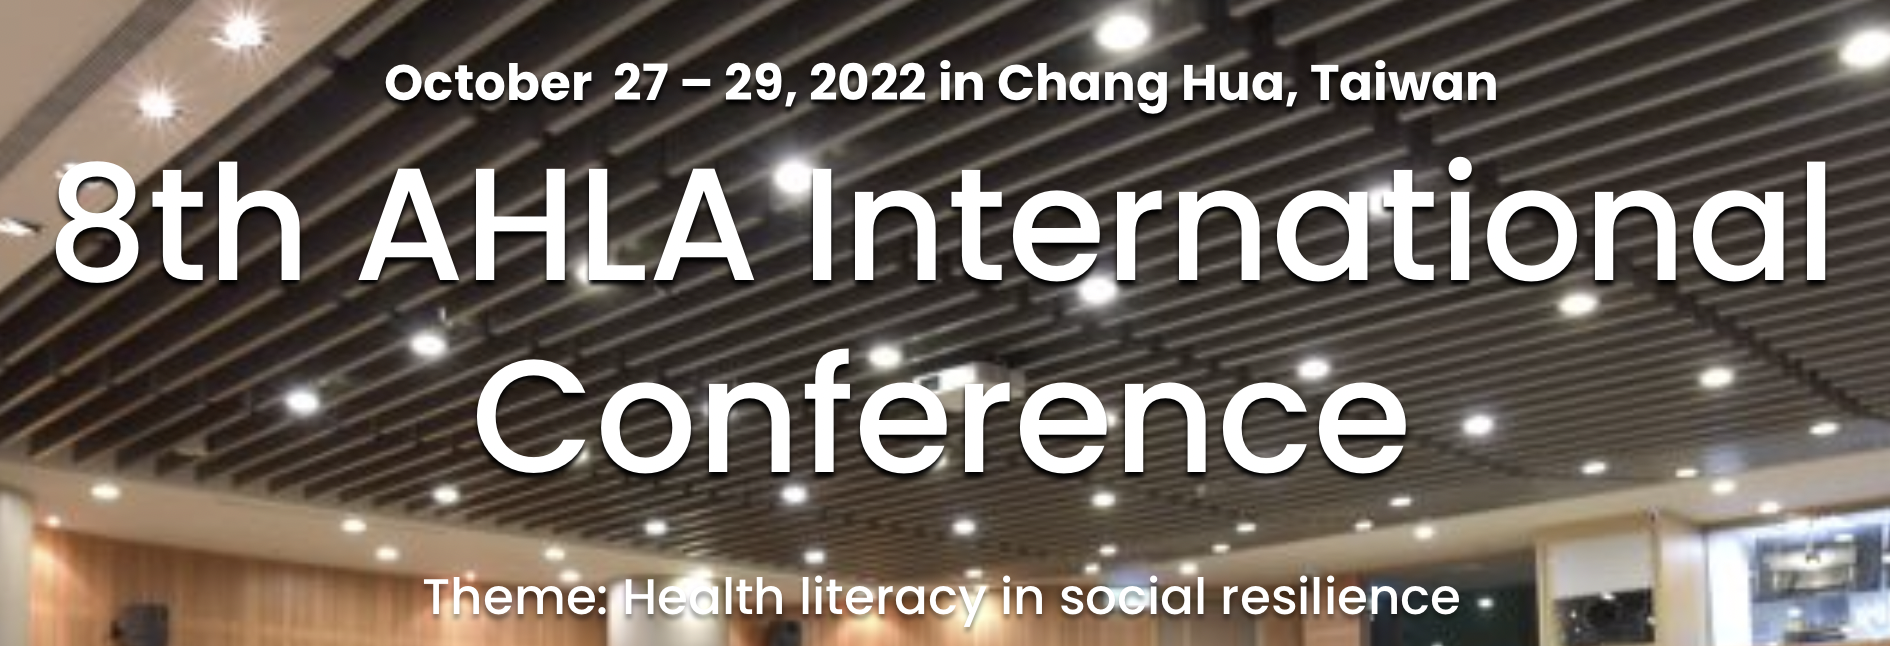 CONFERENCE 2022 Conference AHLA Asian Health Literacy Association